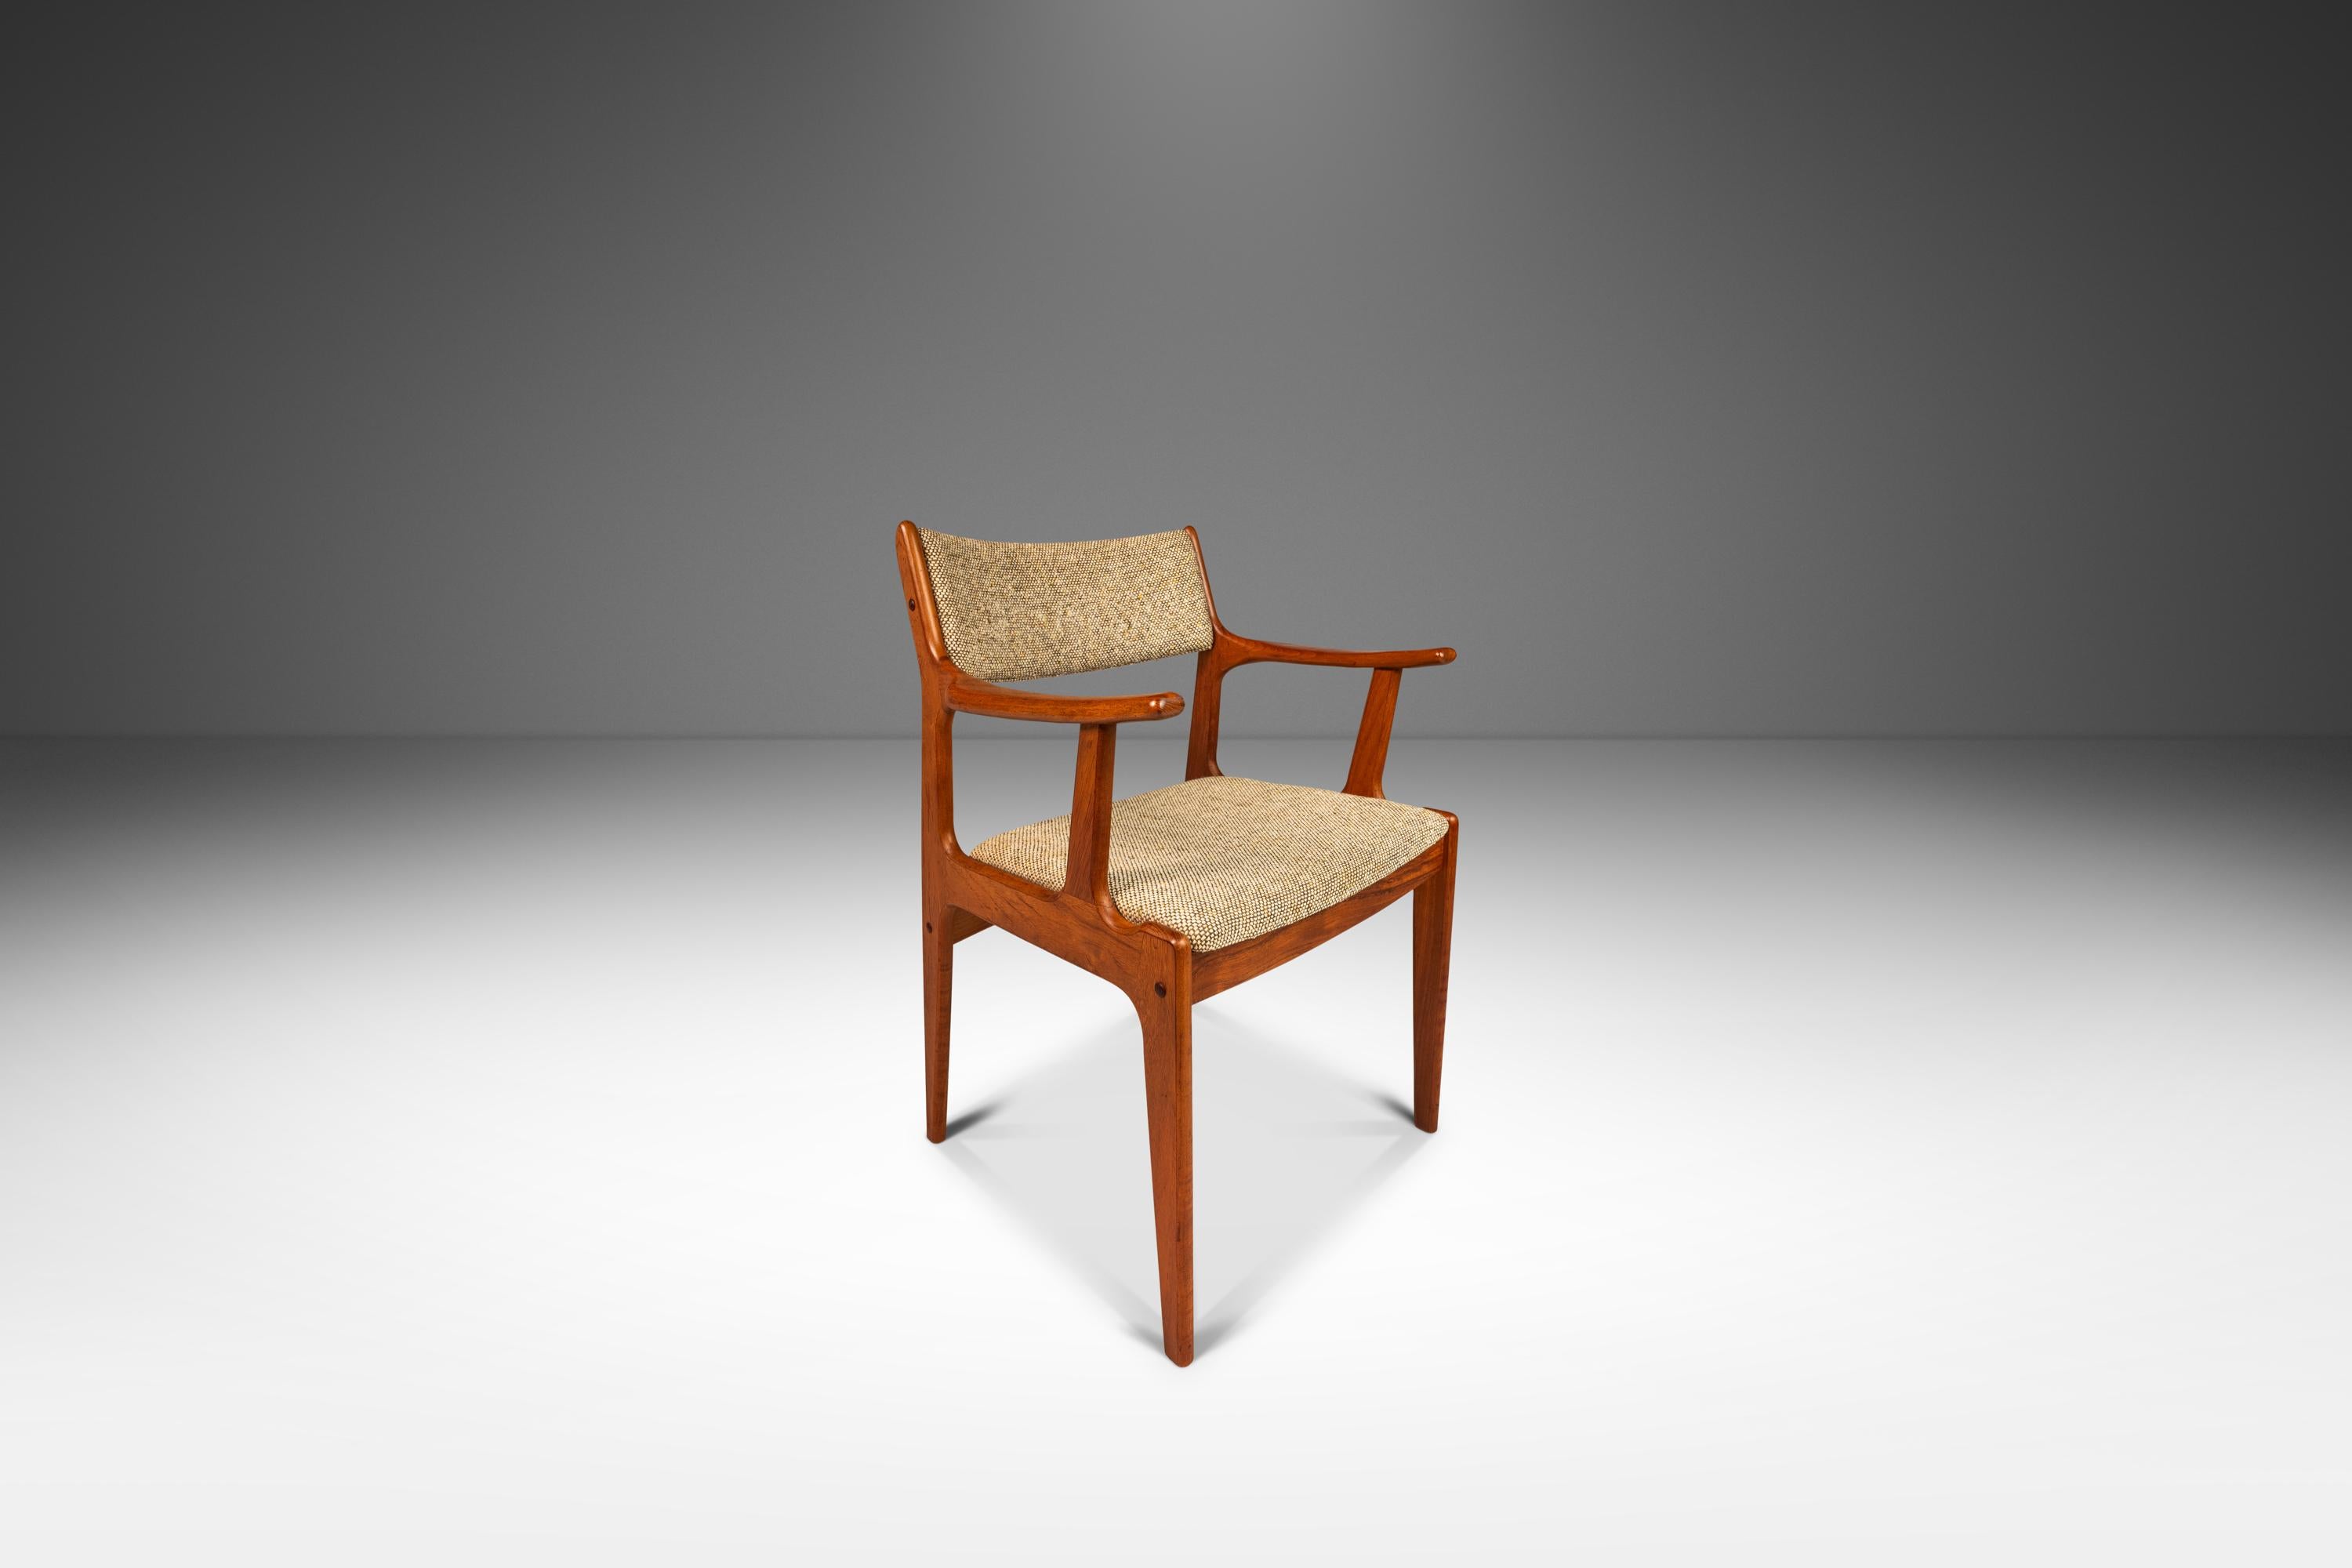 Danish Mid-Century Arm Chair in Solid Teak & Original Fabric by D-Scan, c. 1970s For Sale 3